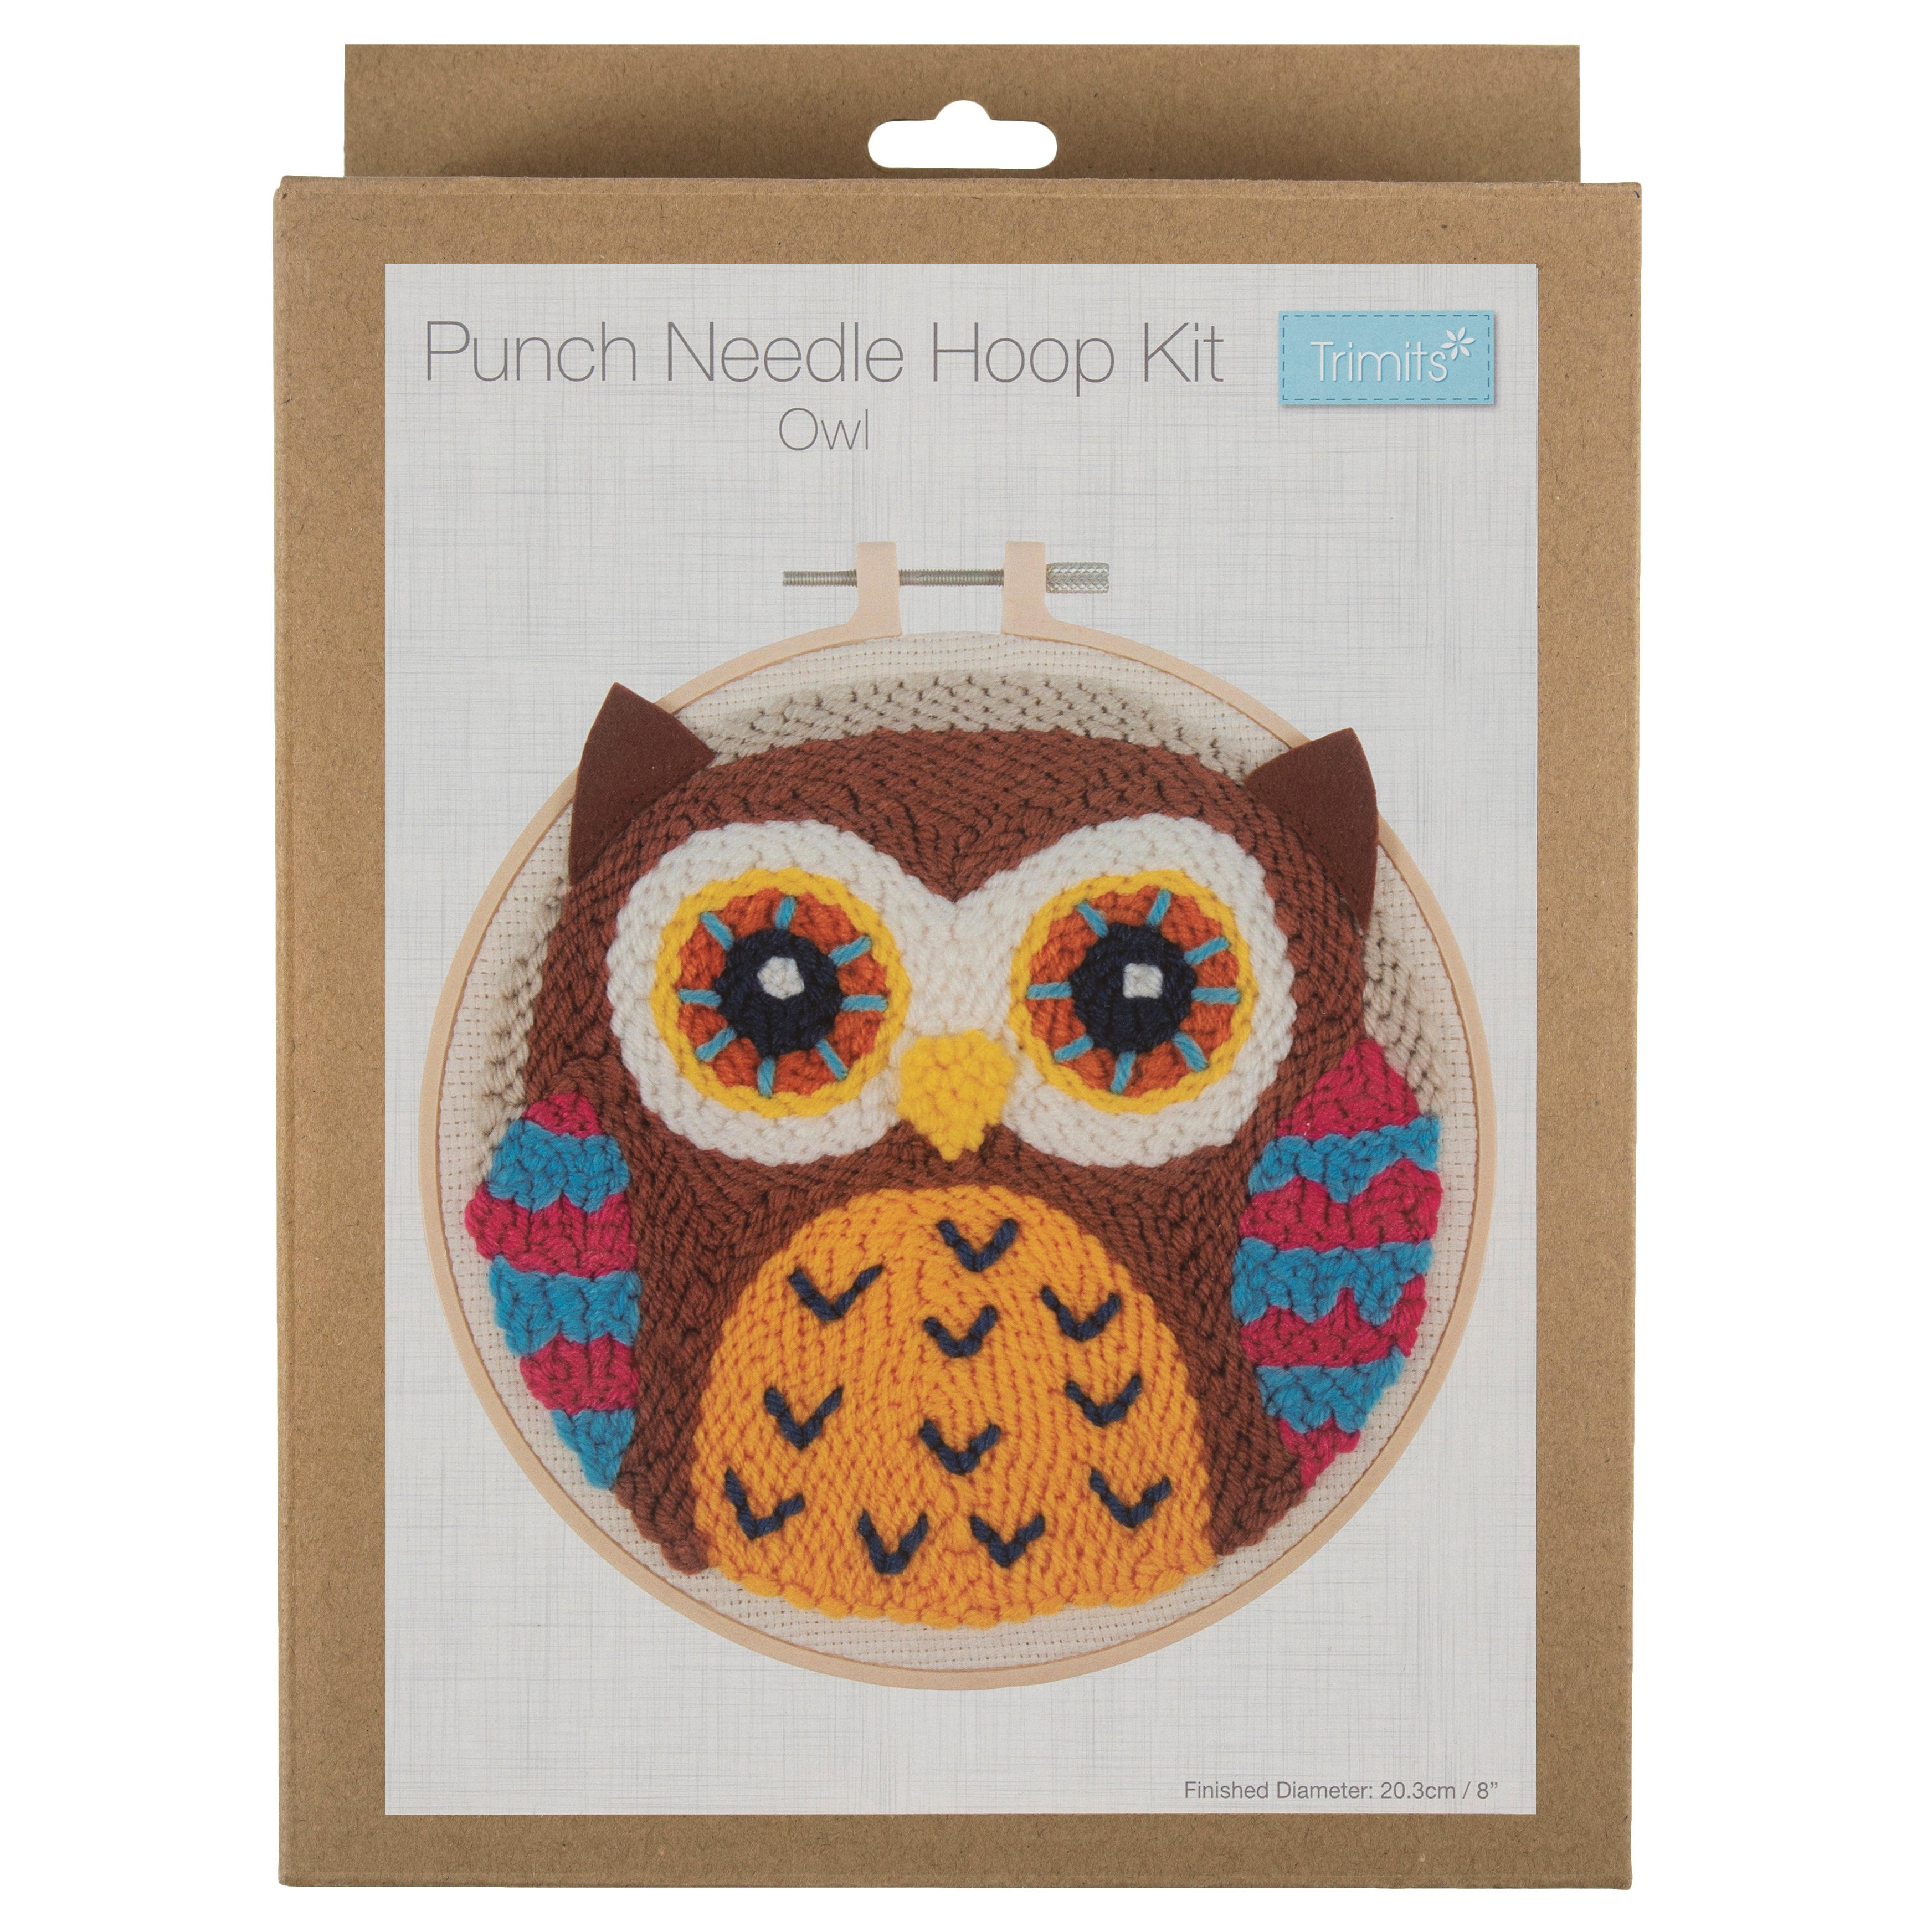 Trimits Punch Needle Kit with Hoop - Owl